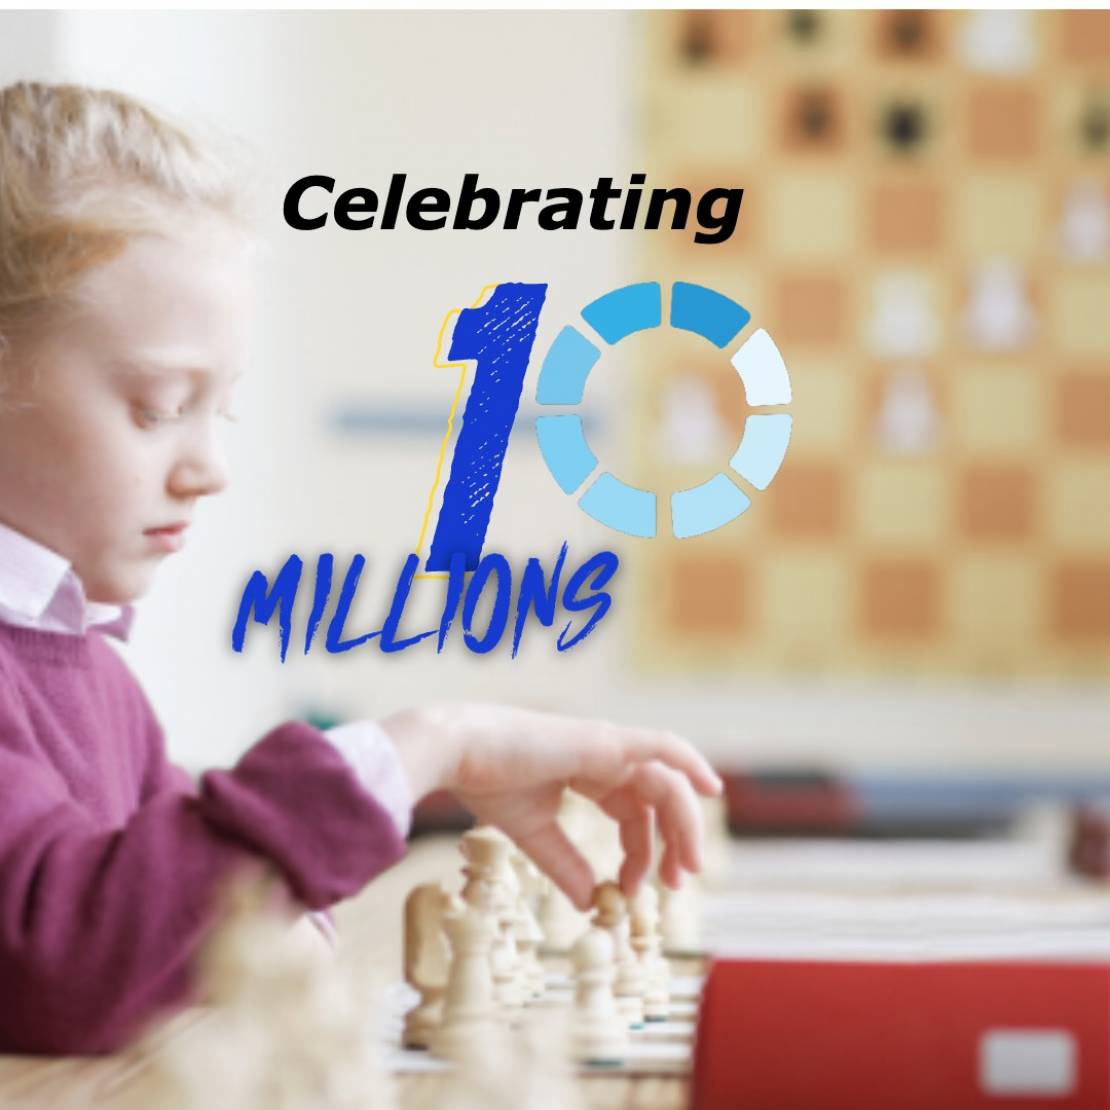 Opening Master Celebrates Milestone: Over 10 Million Official Human Chess Games!